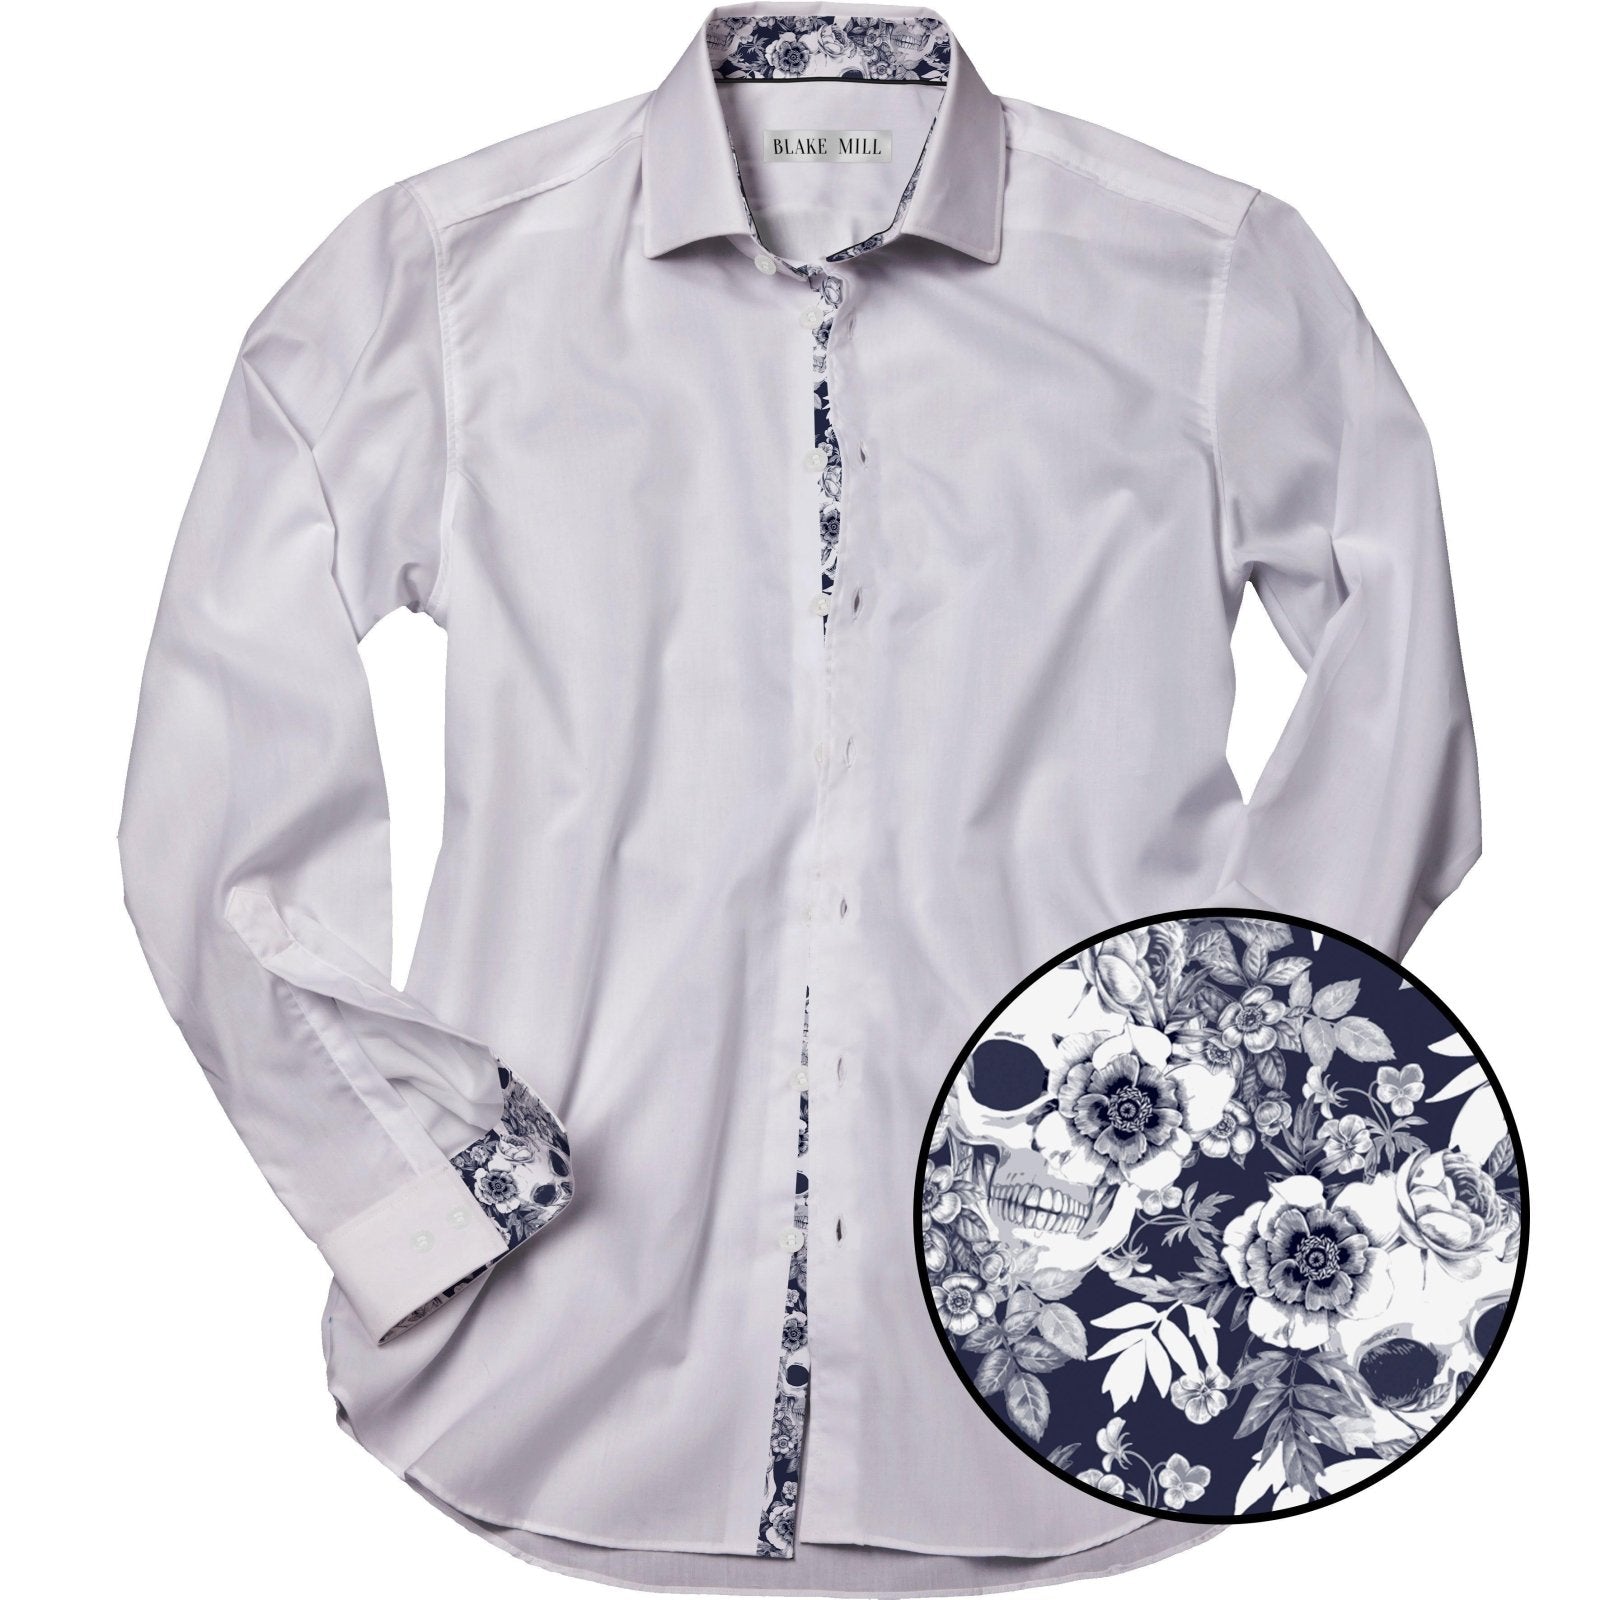 White with Skulls 'n Roses Accents Shirt - Blake Mill